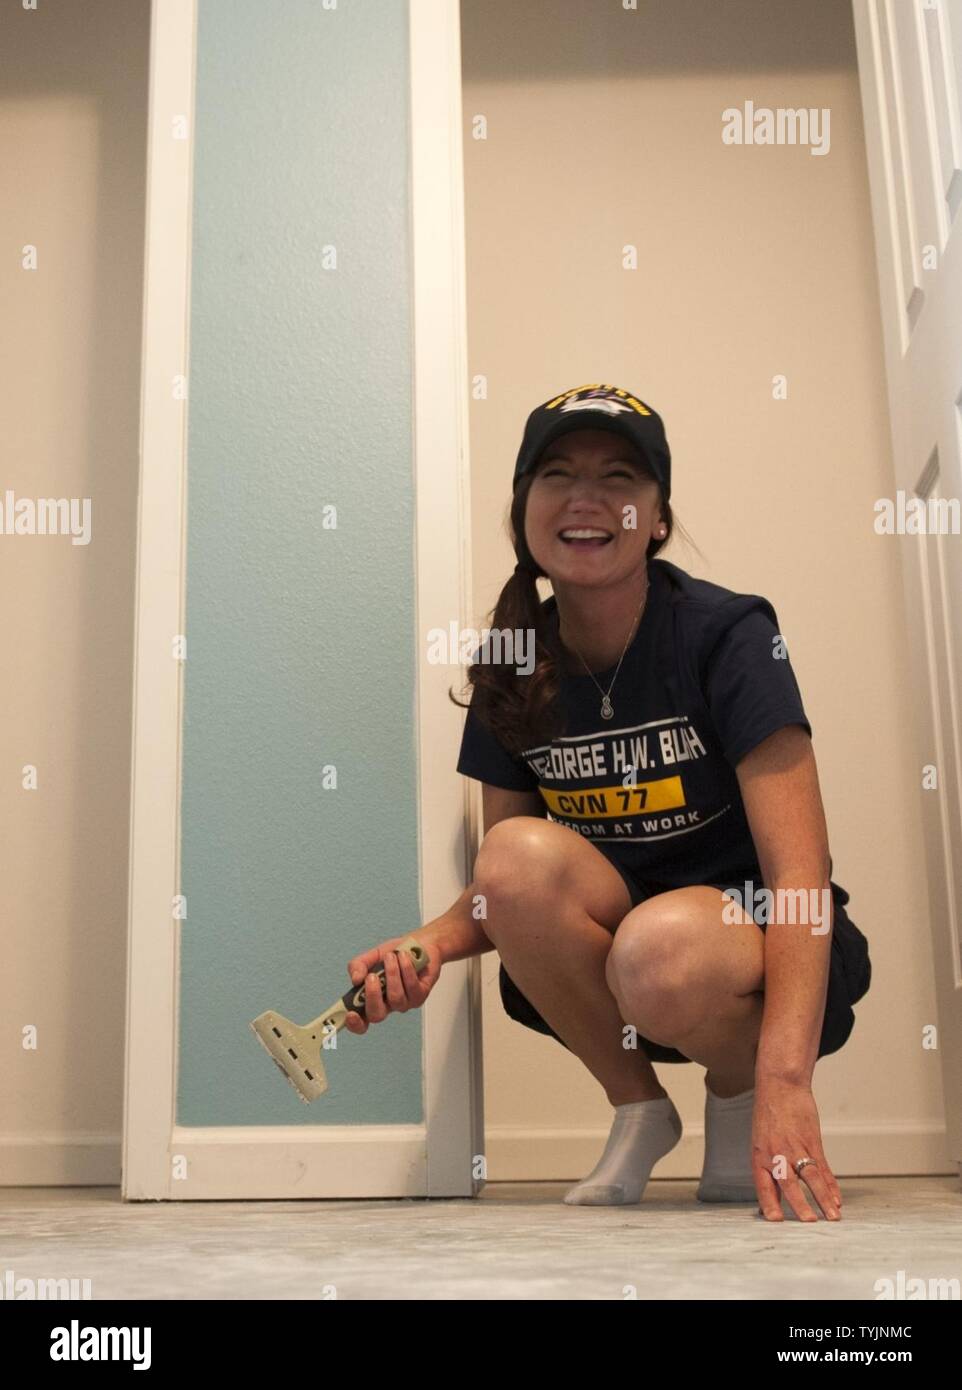 (COLLEGE STATION, Texas) Petty Officer 1st Class Joanna Waugh, 2016 Senior Sailor of the Year for the aircraft carrier USS George H.W. Bush (CVN 77), scrapes the foundation of a home during a Habitat for Humanity project in College Station, Texas. The project is part of a two-day namesake trip to Texas where Sailors engaged with the local community about the importance of the Navy. Stock Photo